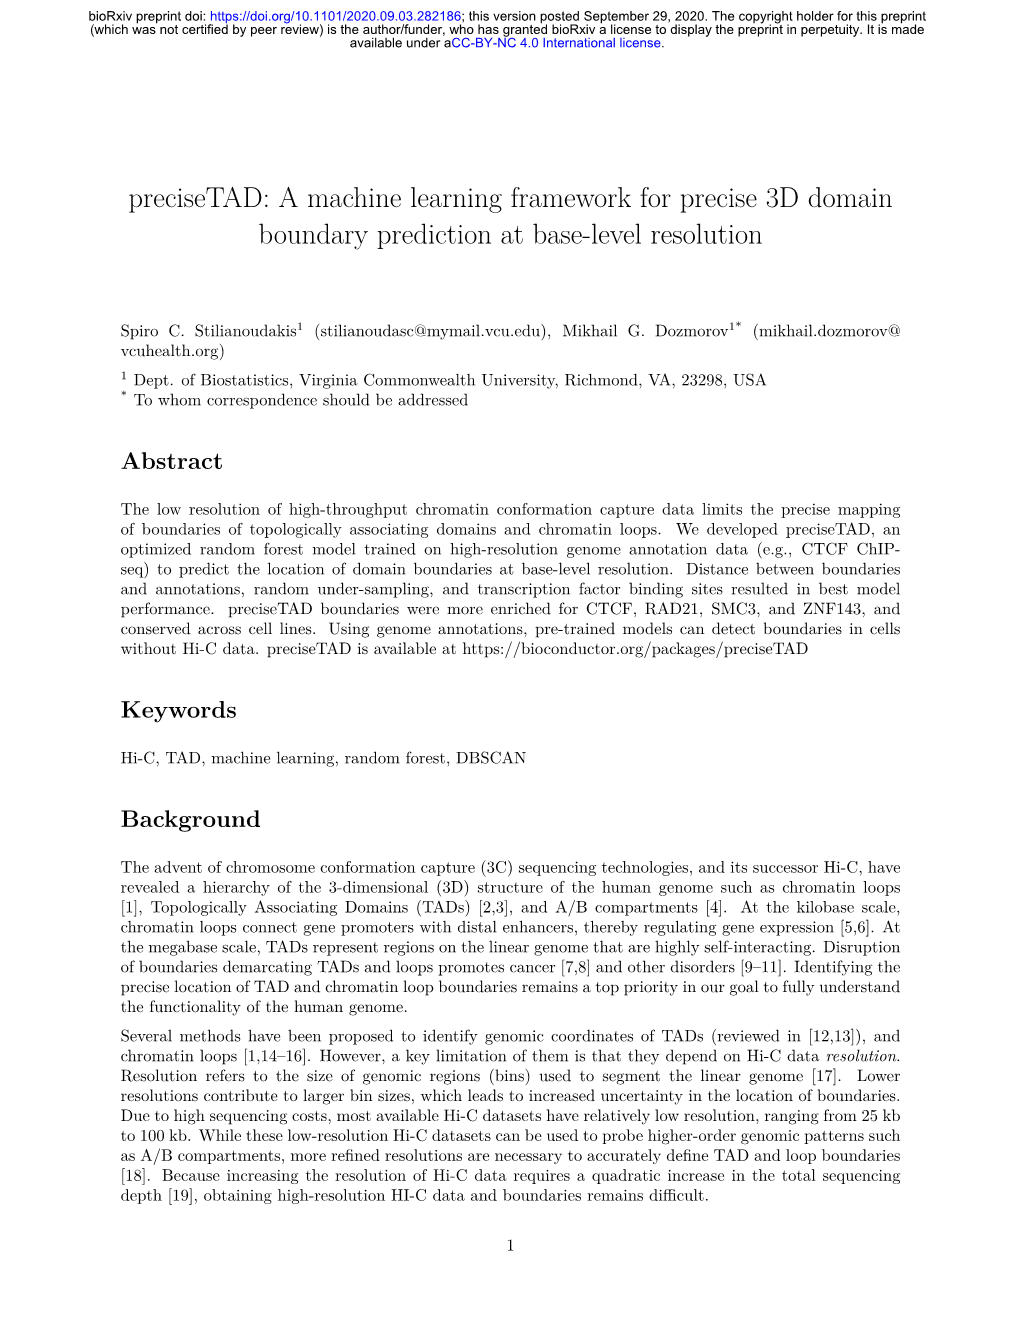 A Machine Learning Framework for Precise 3D Domain Boundary Prediction at Base-Level Resolution